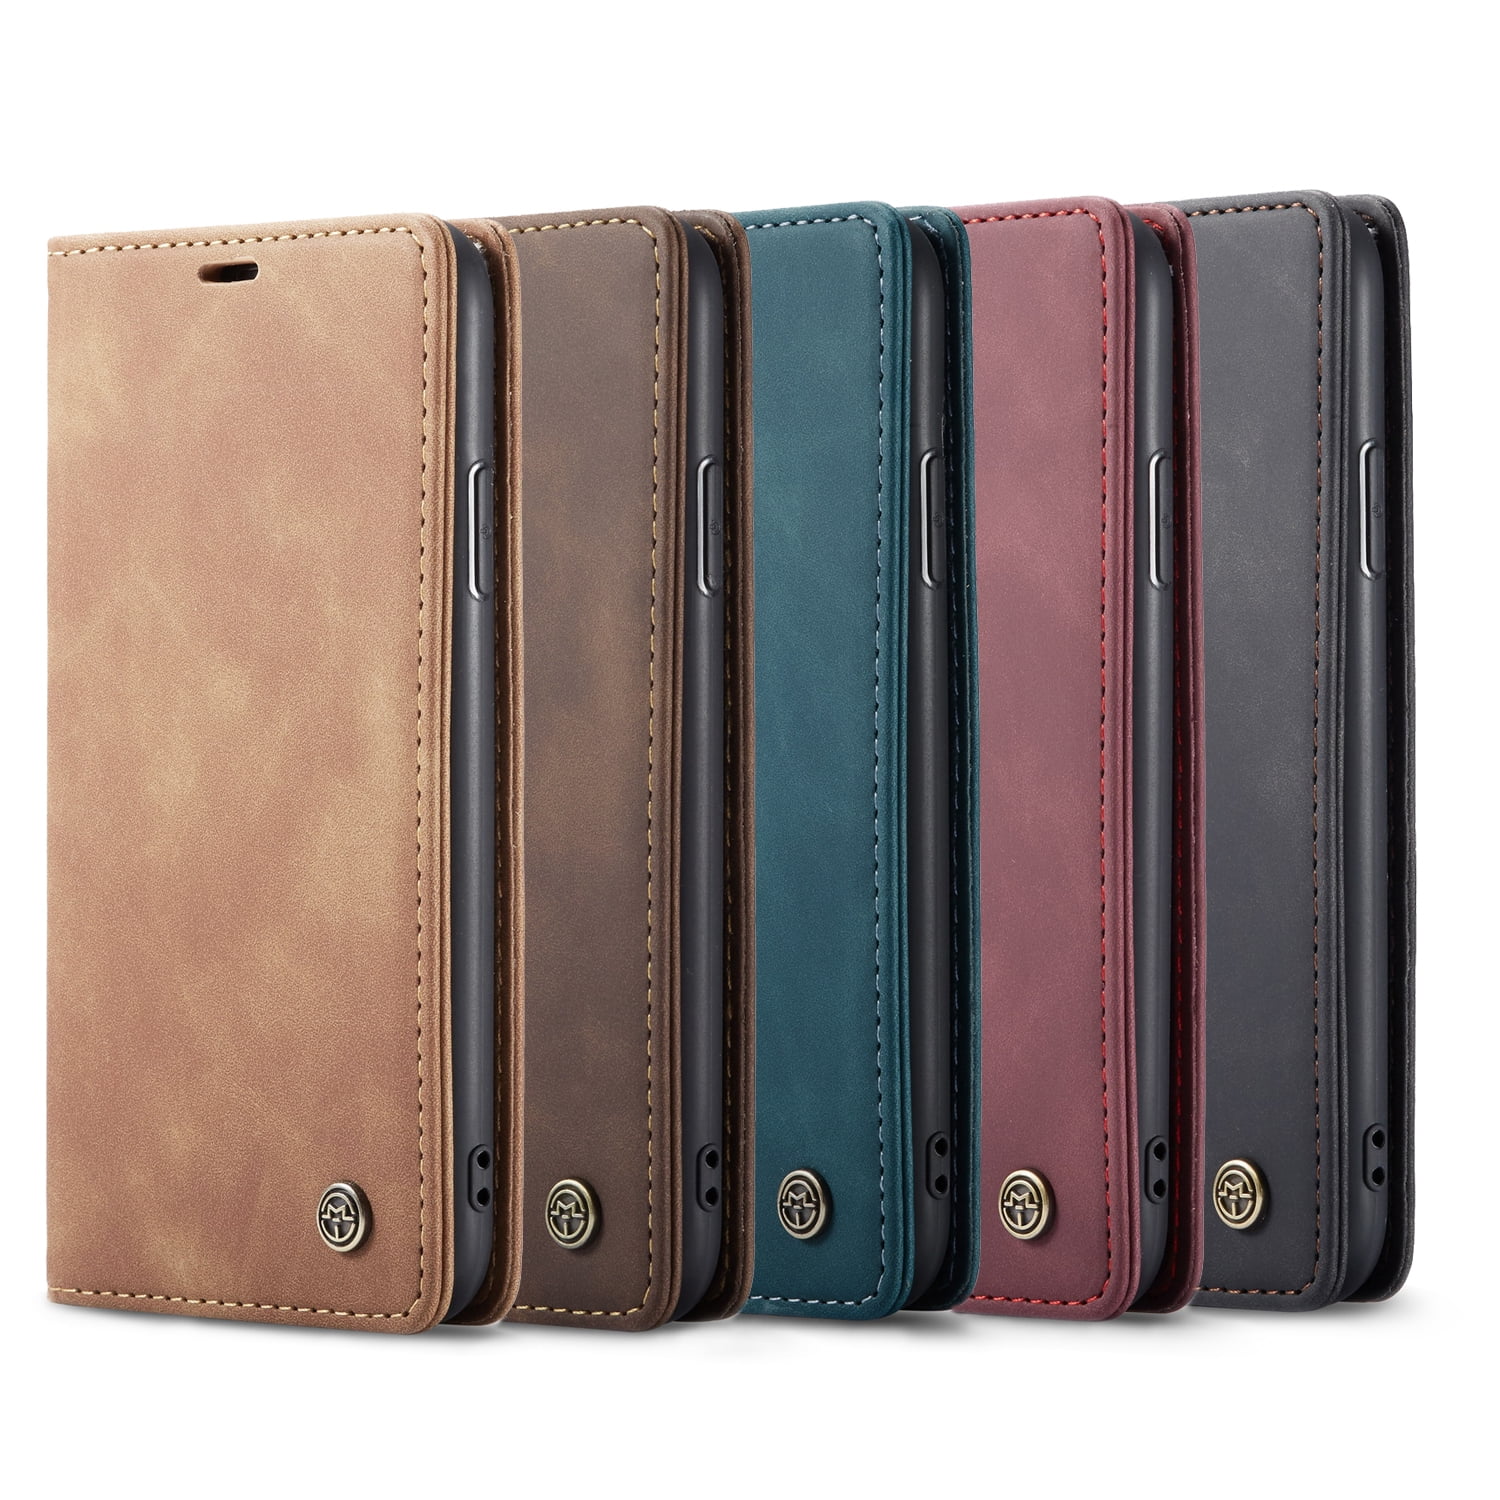 elephant2 PU Leather Wallet Flip Case for iPhone 11 Positive Cover Compatible with iPhone 11 